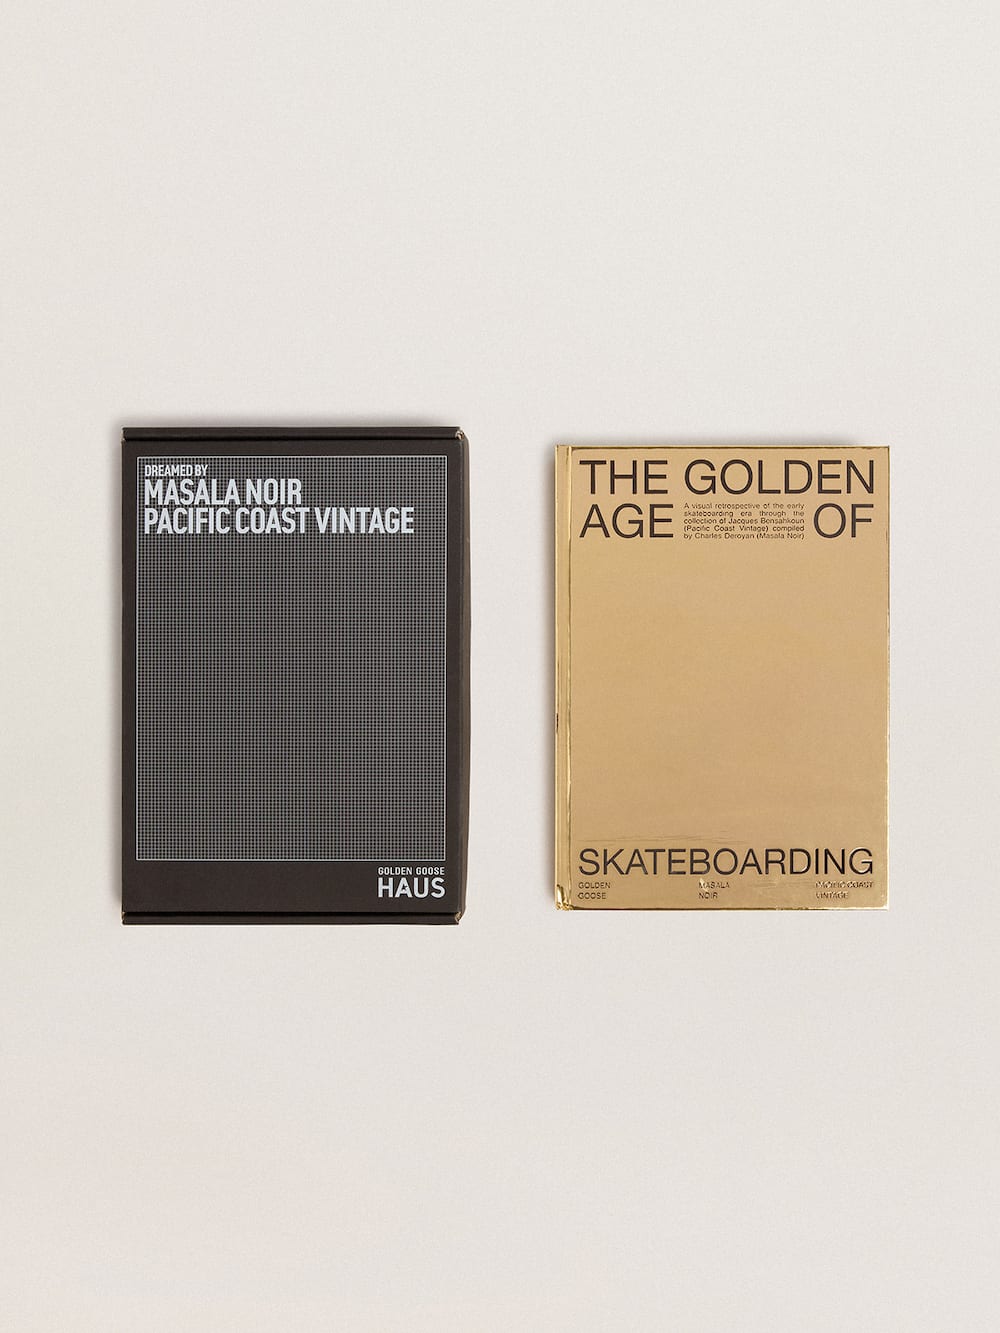 Golden Goose - « The Golden age of Skateboarding » Dreamed by Pacific Coast Vintage et Masala Noir Exclusivité HAUS of Dreamers in 